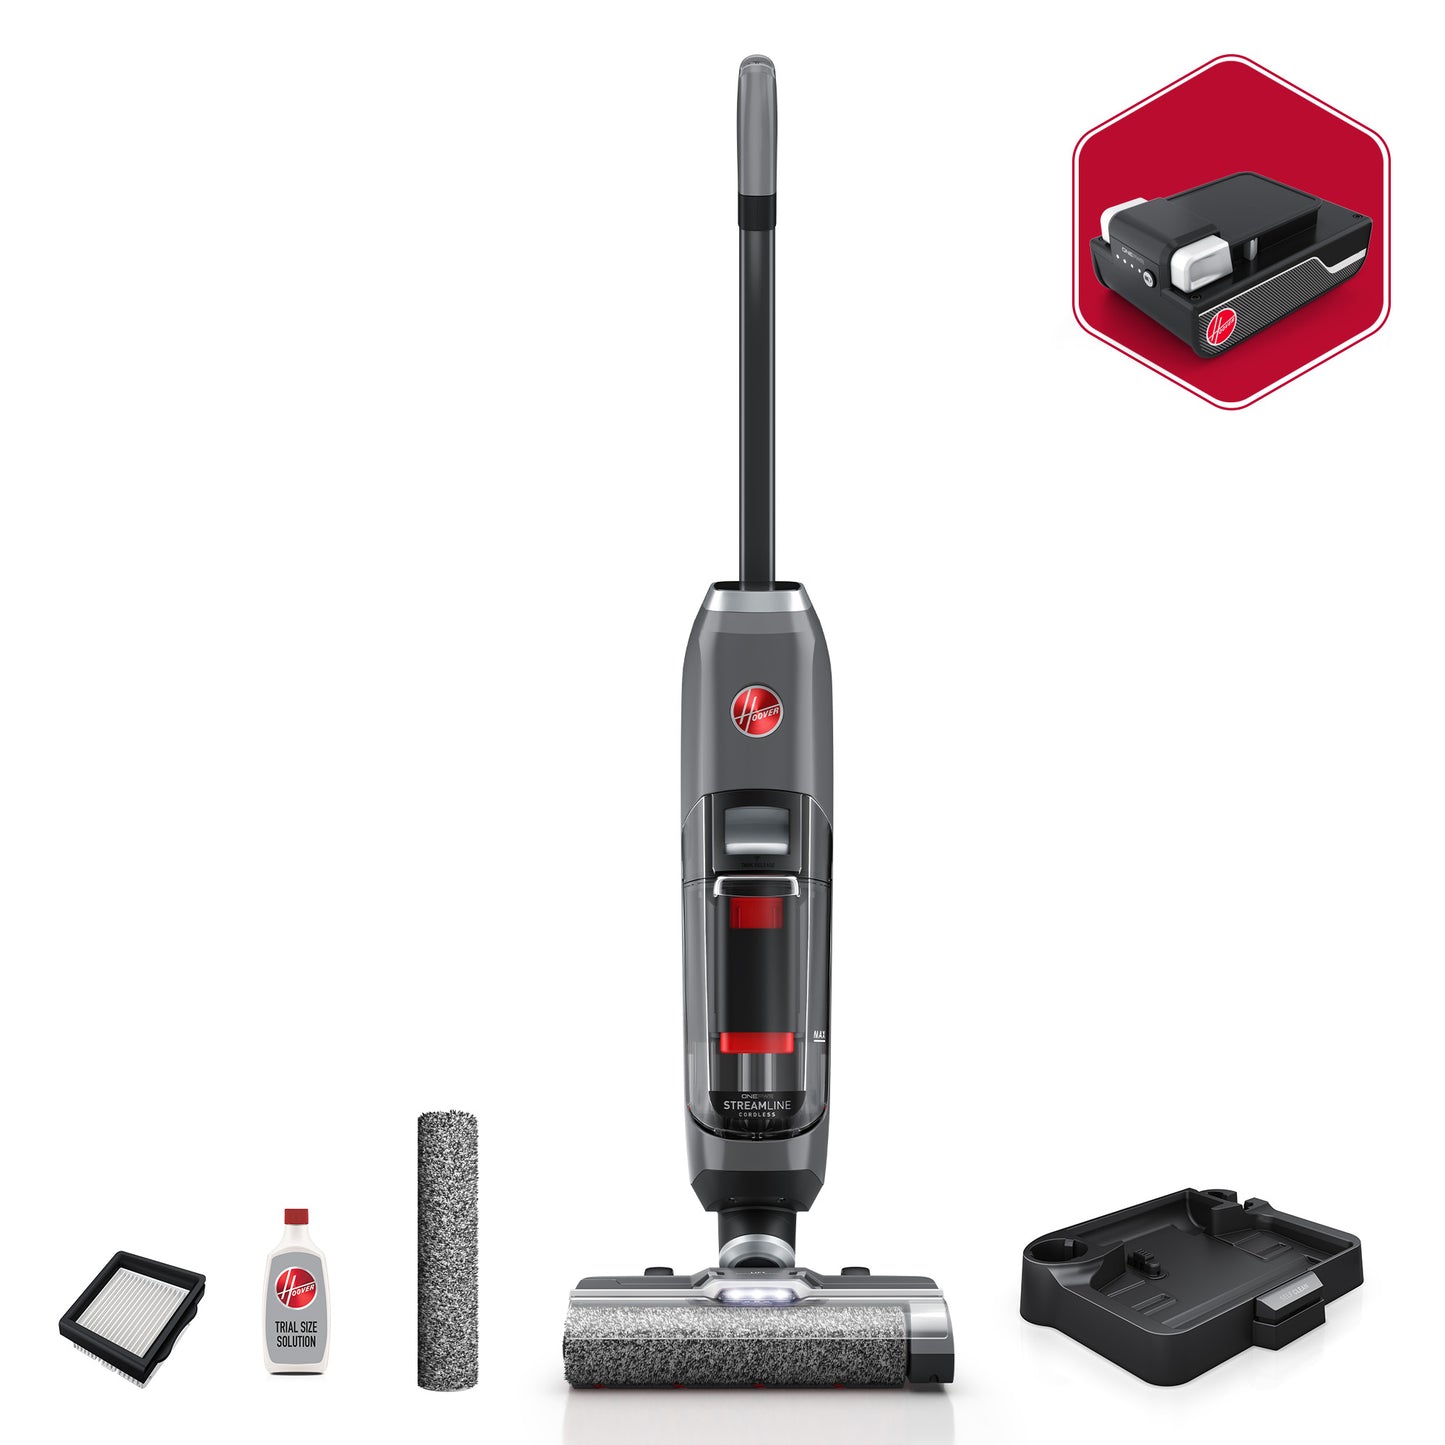 ONEPWR® Streamline Cordless Hard Floor Wet Dry Vacuum with Boost Mode